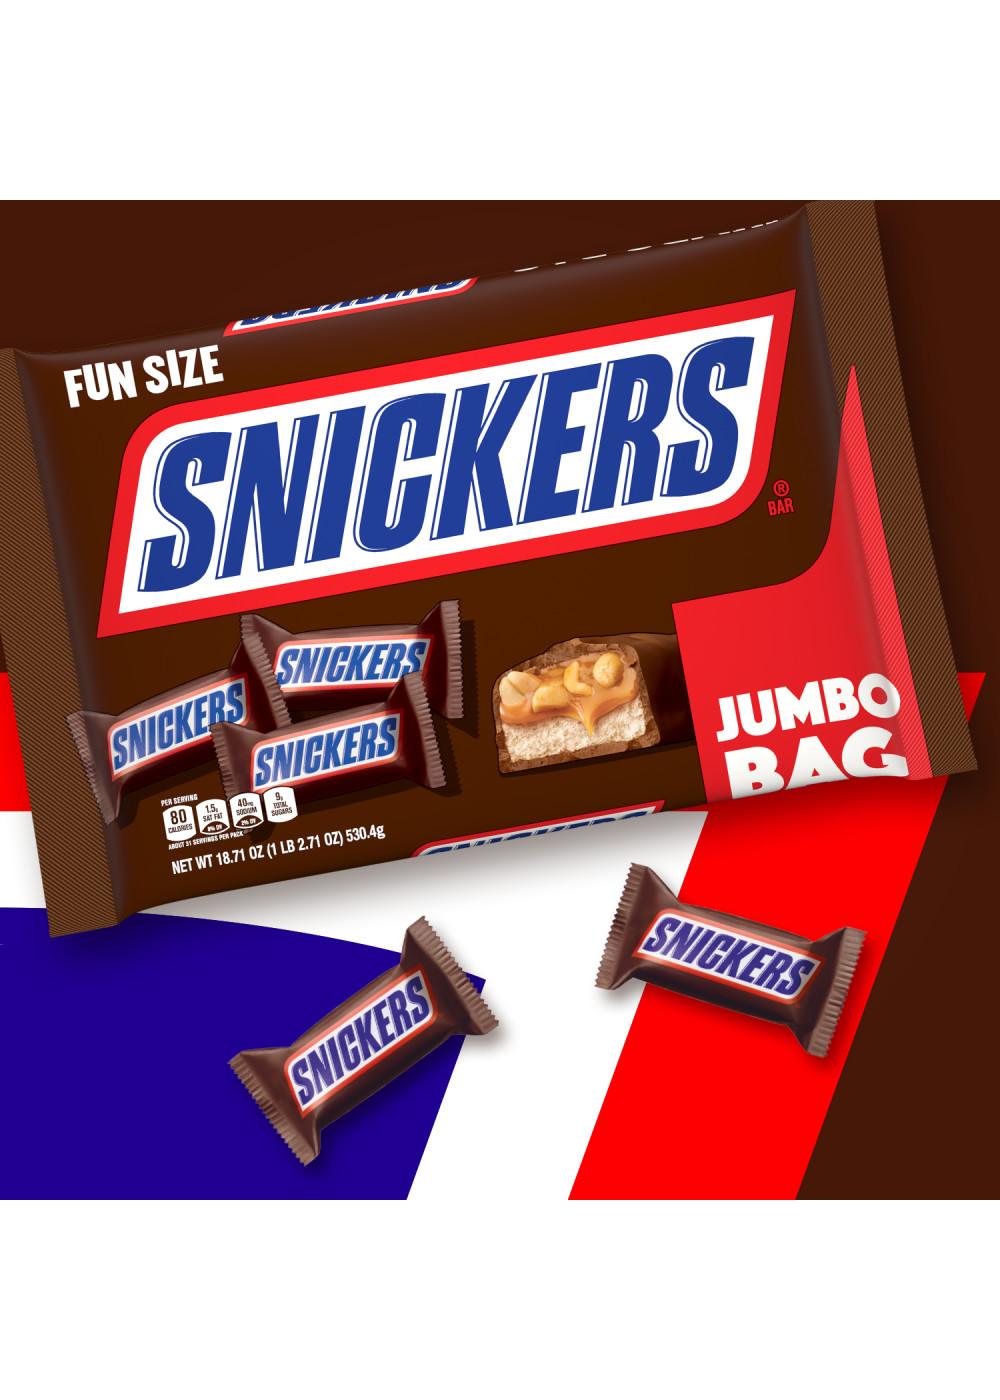 SNICKERS Minis Size Milk Chocolate Candy Bars, Family Size, 18.0 oz Bag, Packaged Candy